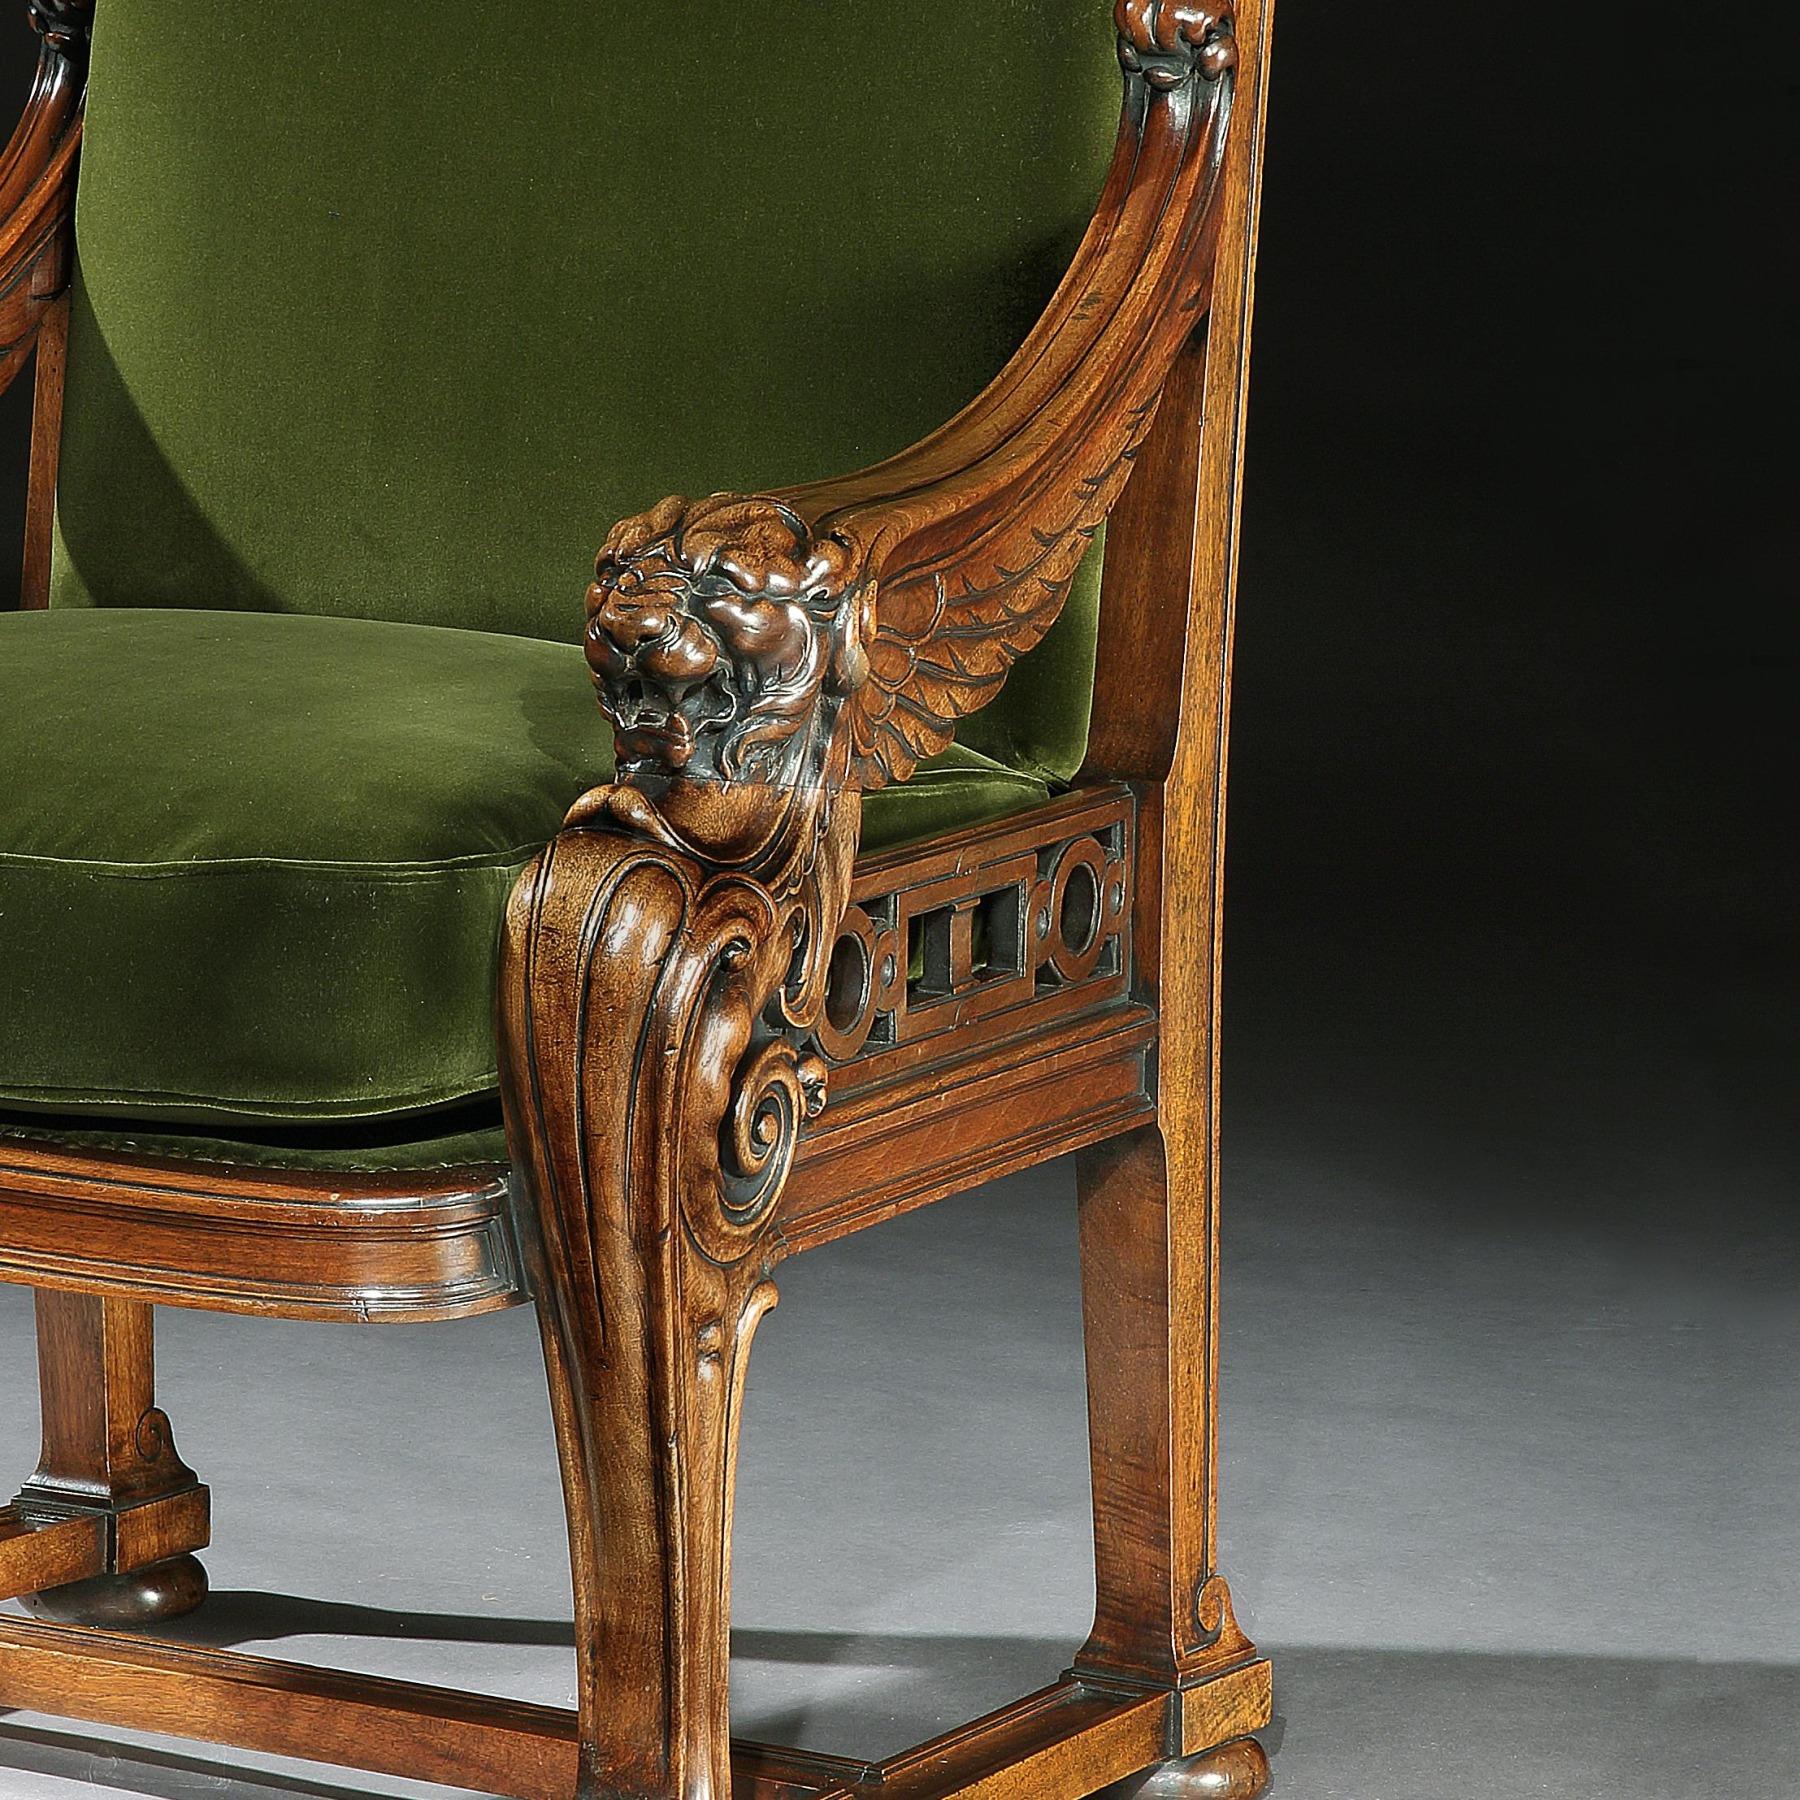 Regency Rare 19th Century Lion Monopodia Armchair After Thomas Hope For Sale